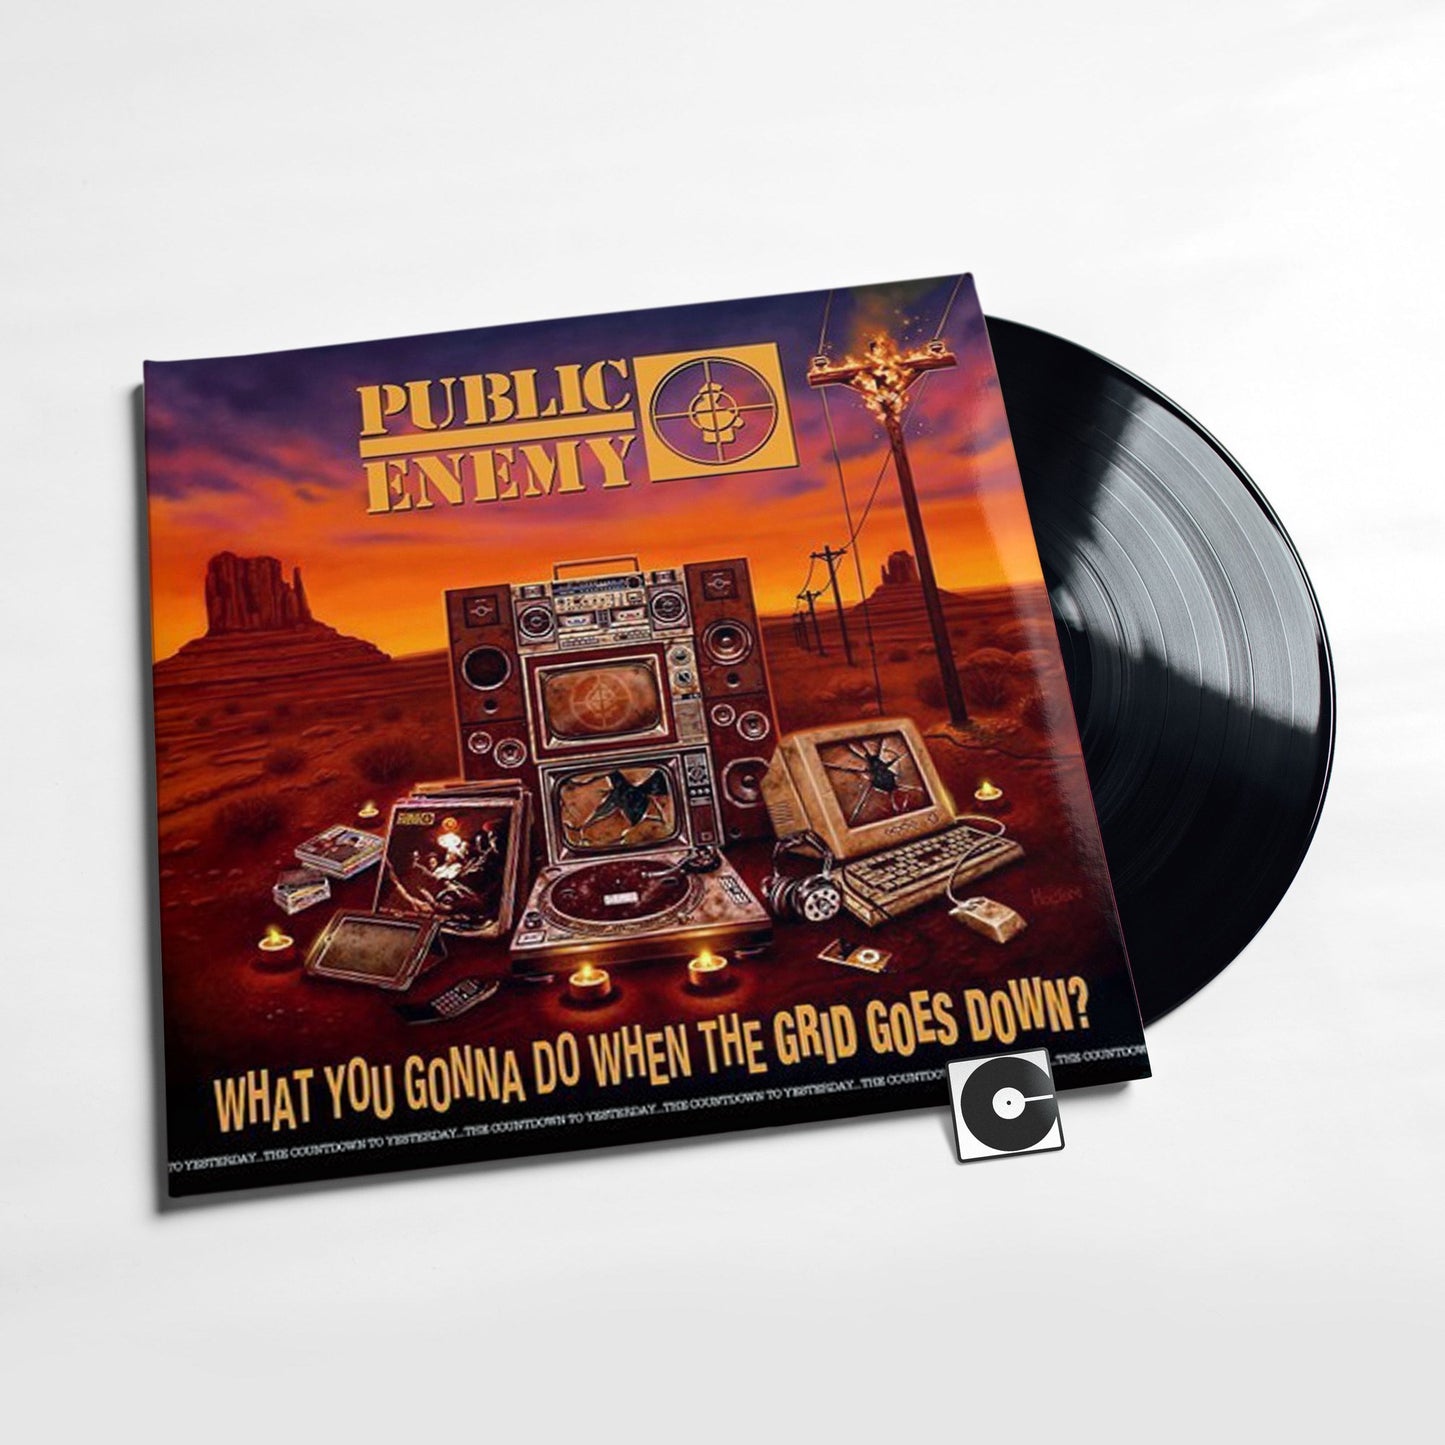 Public Enemy - "What You Gonna Do When The Grid Goes Down?"